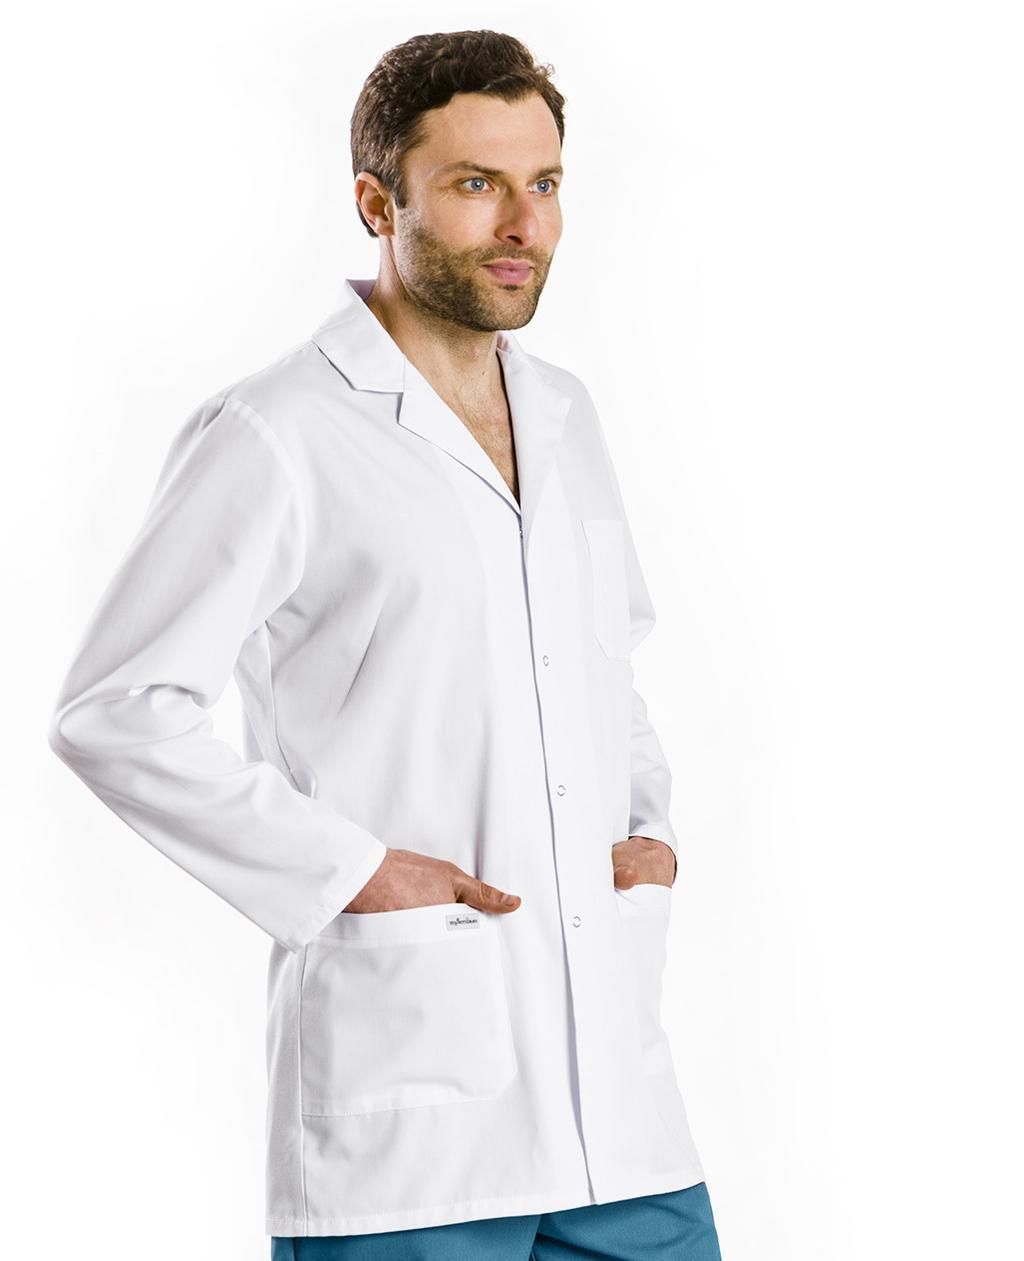 Men s medical tunic long, with a fastening, 2 pockets LC-03 92 96 100 104 108